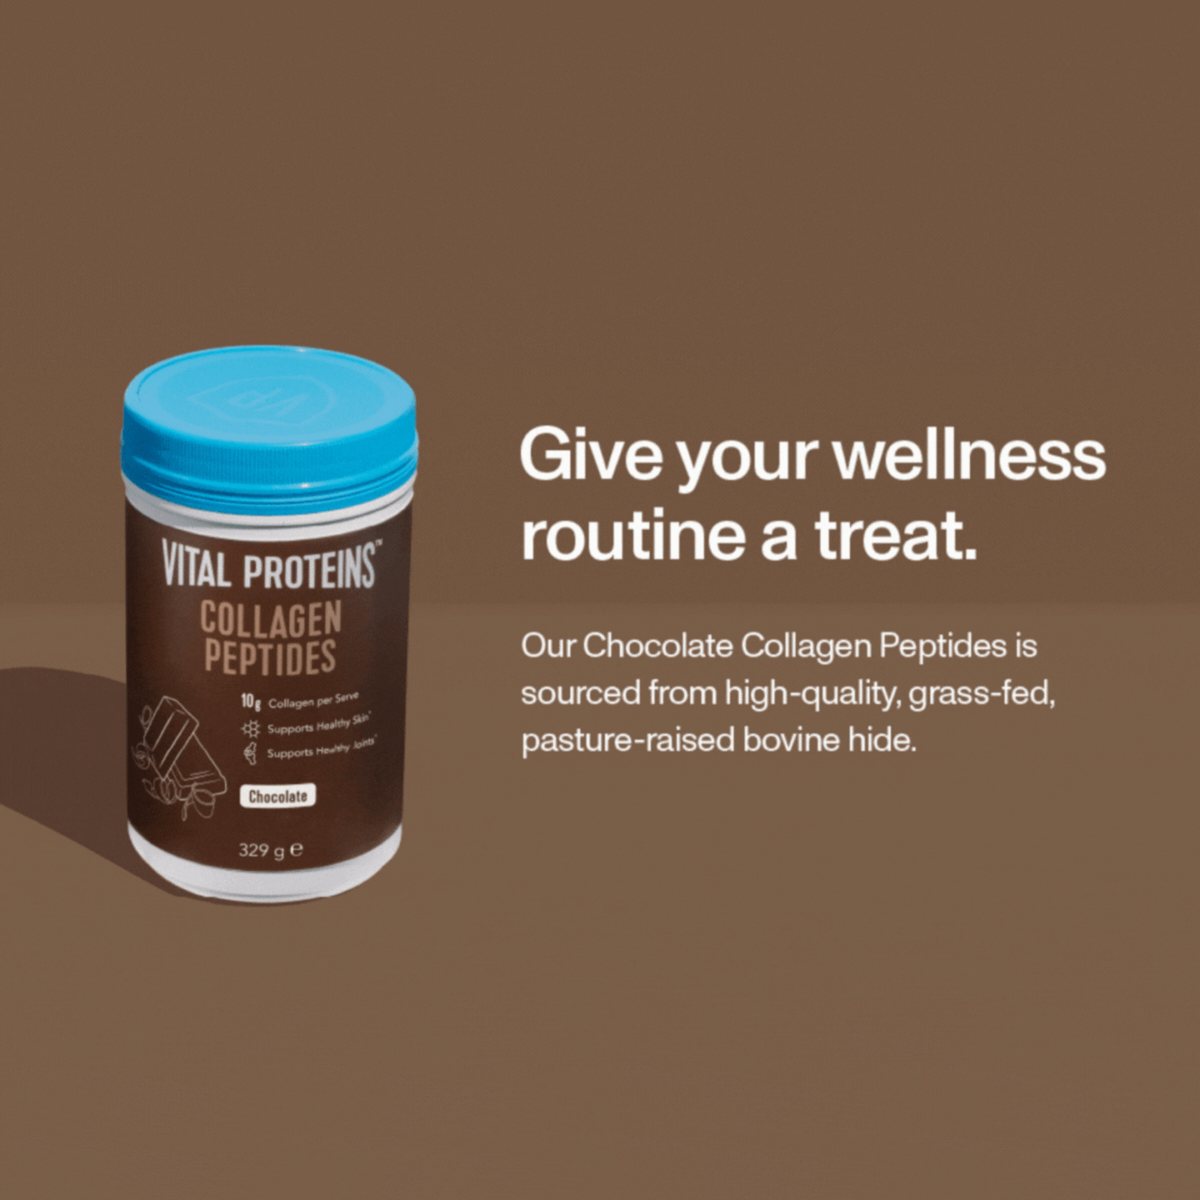 Give your wellness routine a treat.Our Chocolate Collagen Peptides is sourced from high-quality, grass-fed, pasture-raised bovine hide. How to enjoy, mix one serving in hot or cold liquids, stir and enjoy. Try adding to coffee, smoothie or oatmeal.